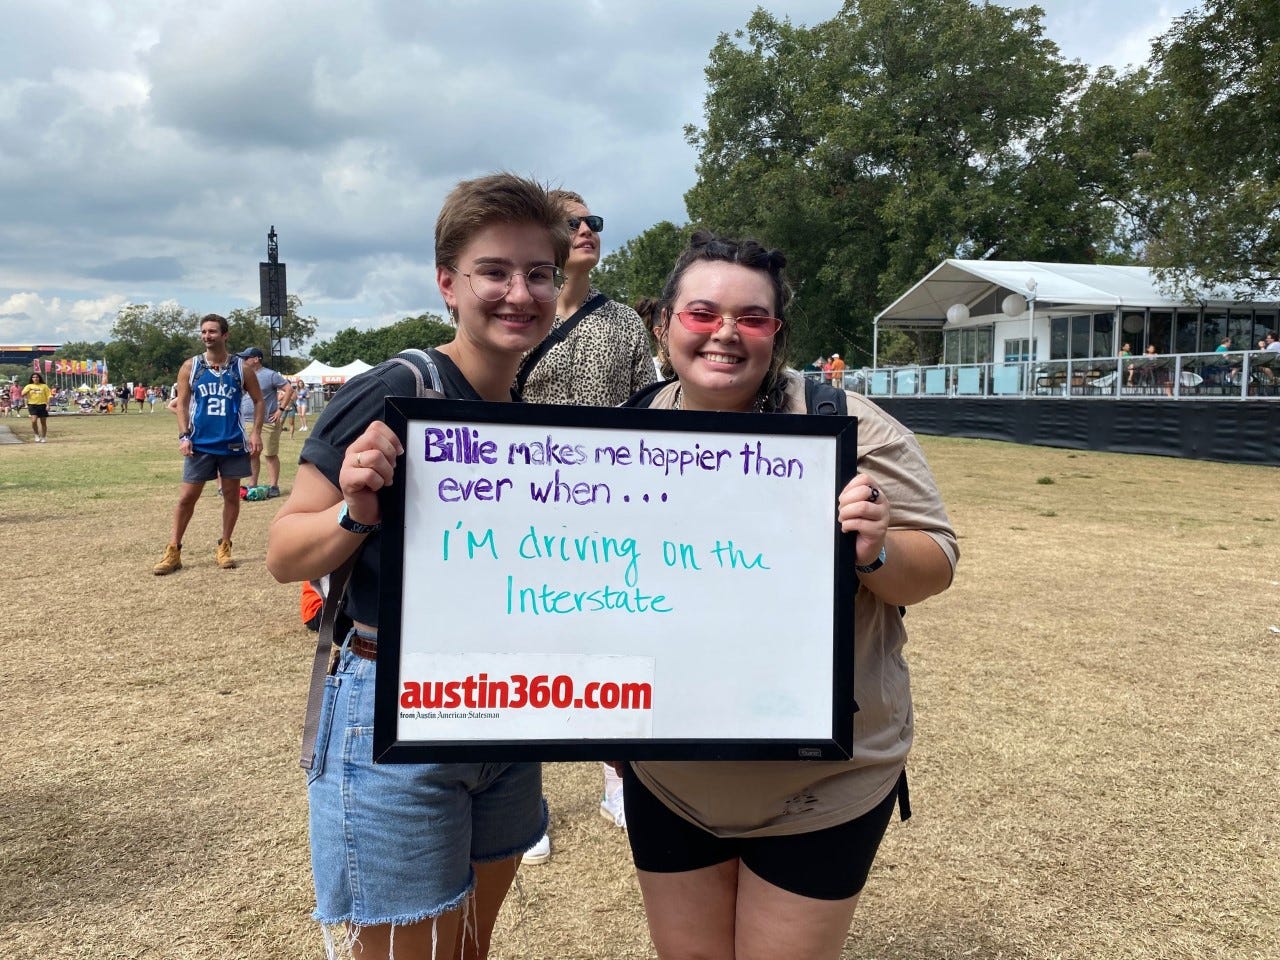 Kristin Bradford, 21, left, and Shelby Ford, 21, waiting for the Billie Eilish show on Saturday Oct. 2, 2021. Both are from Lubbock, Texas.